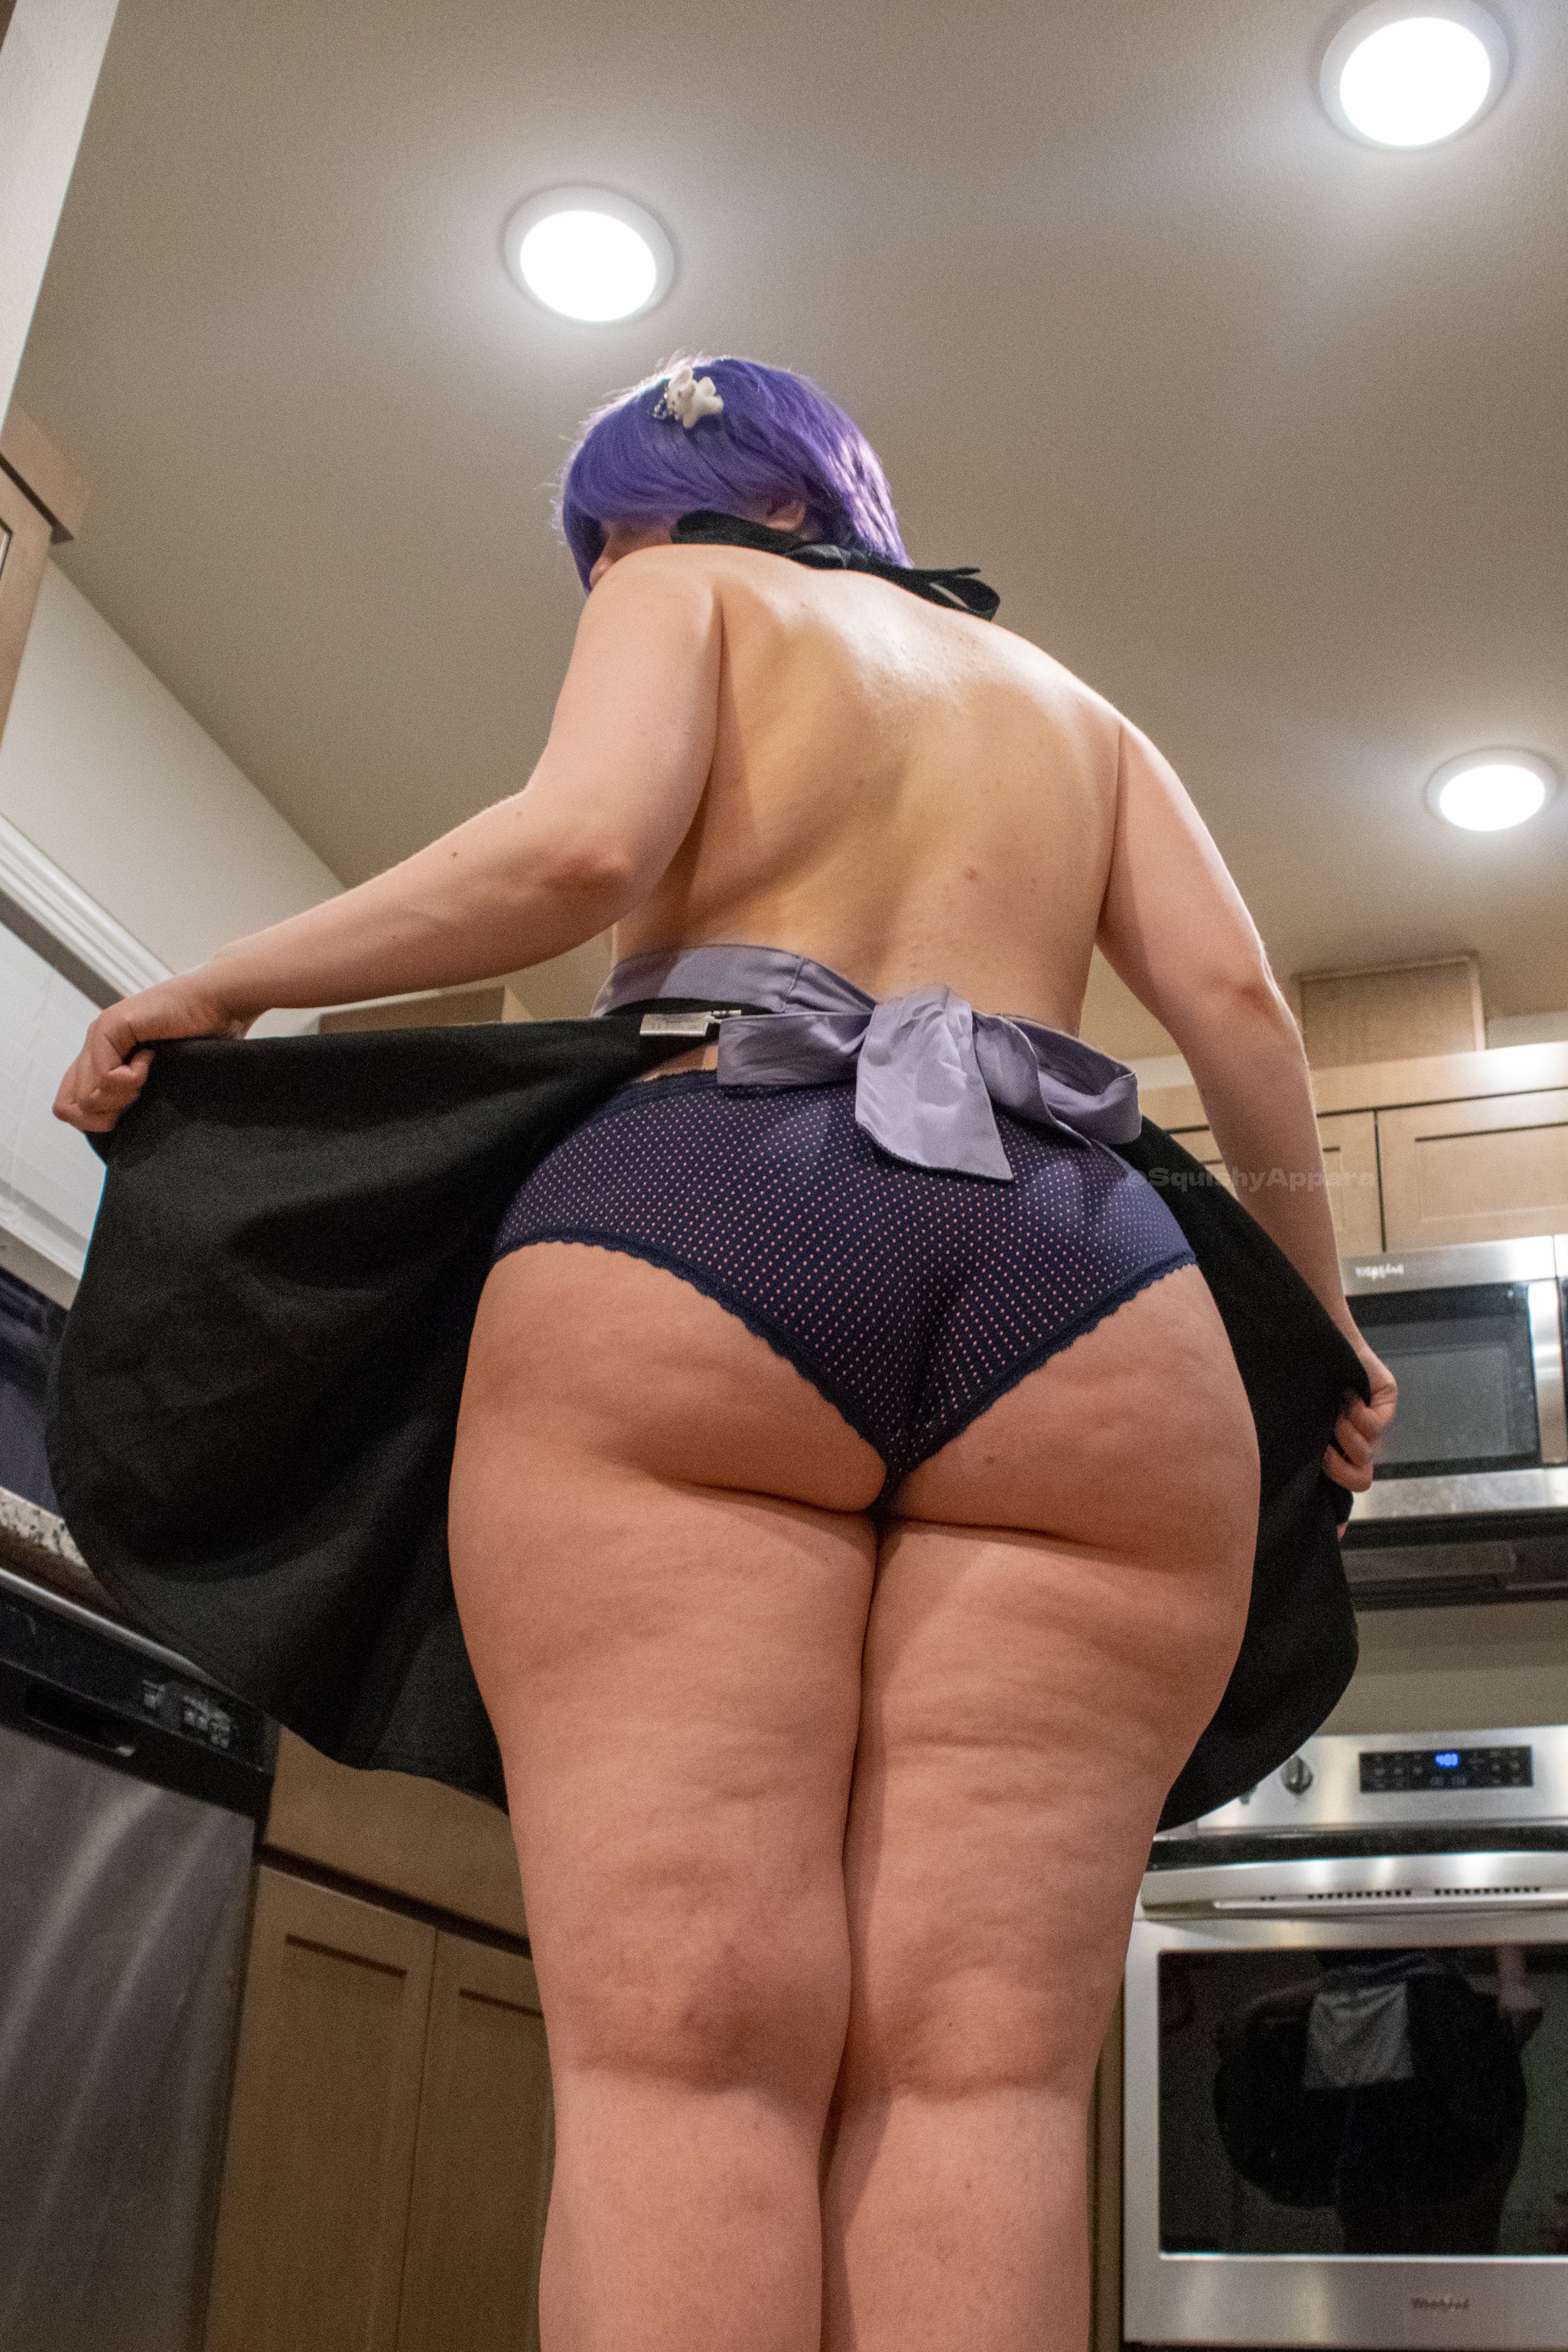 PAWG Hows the underwear